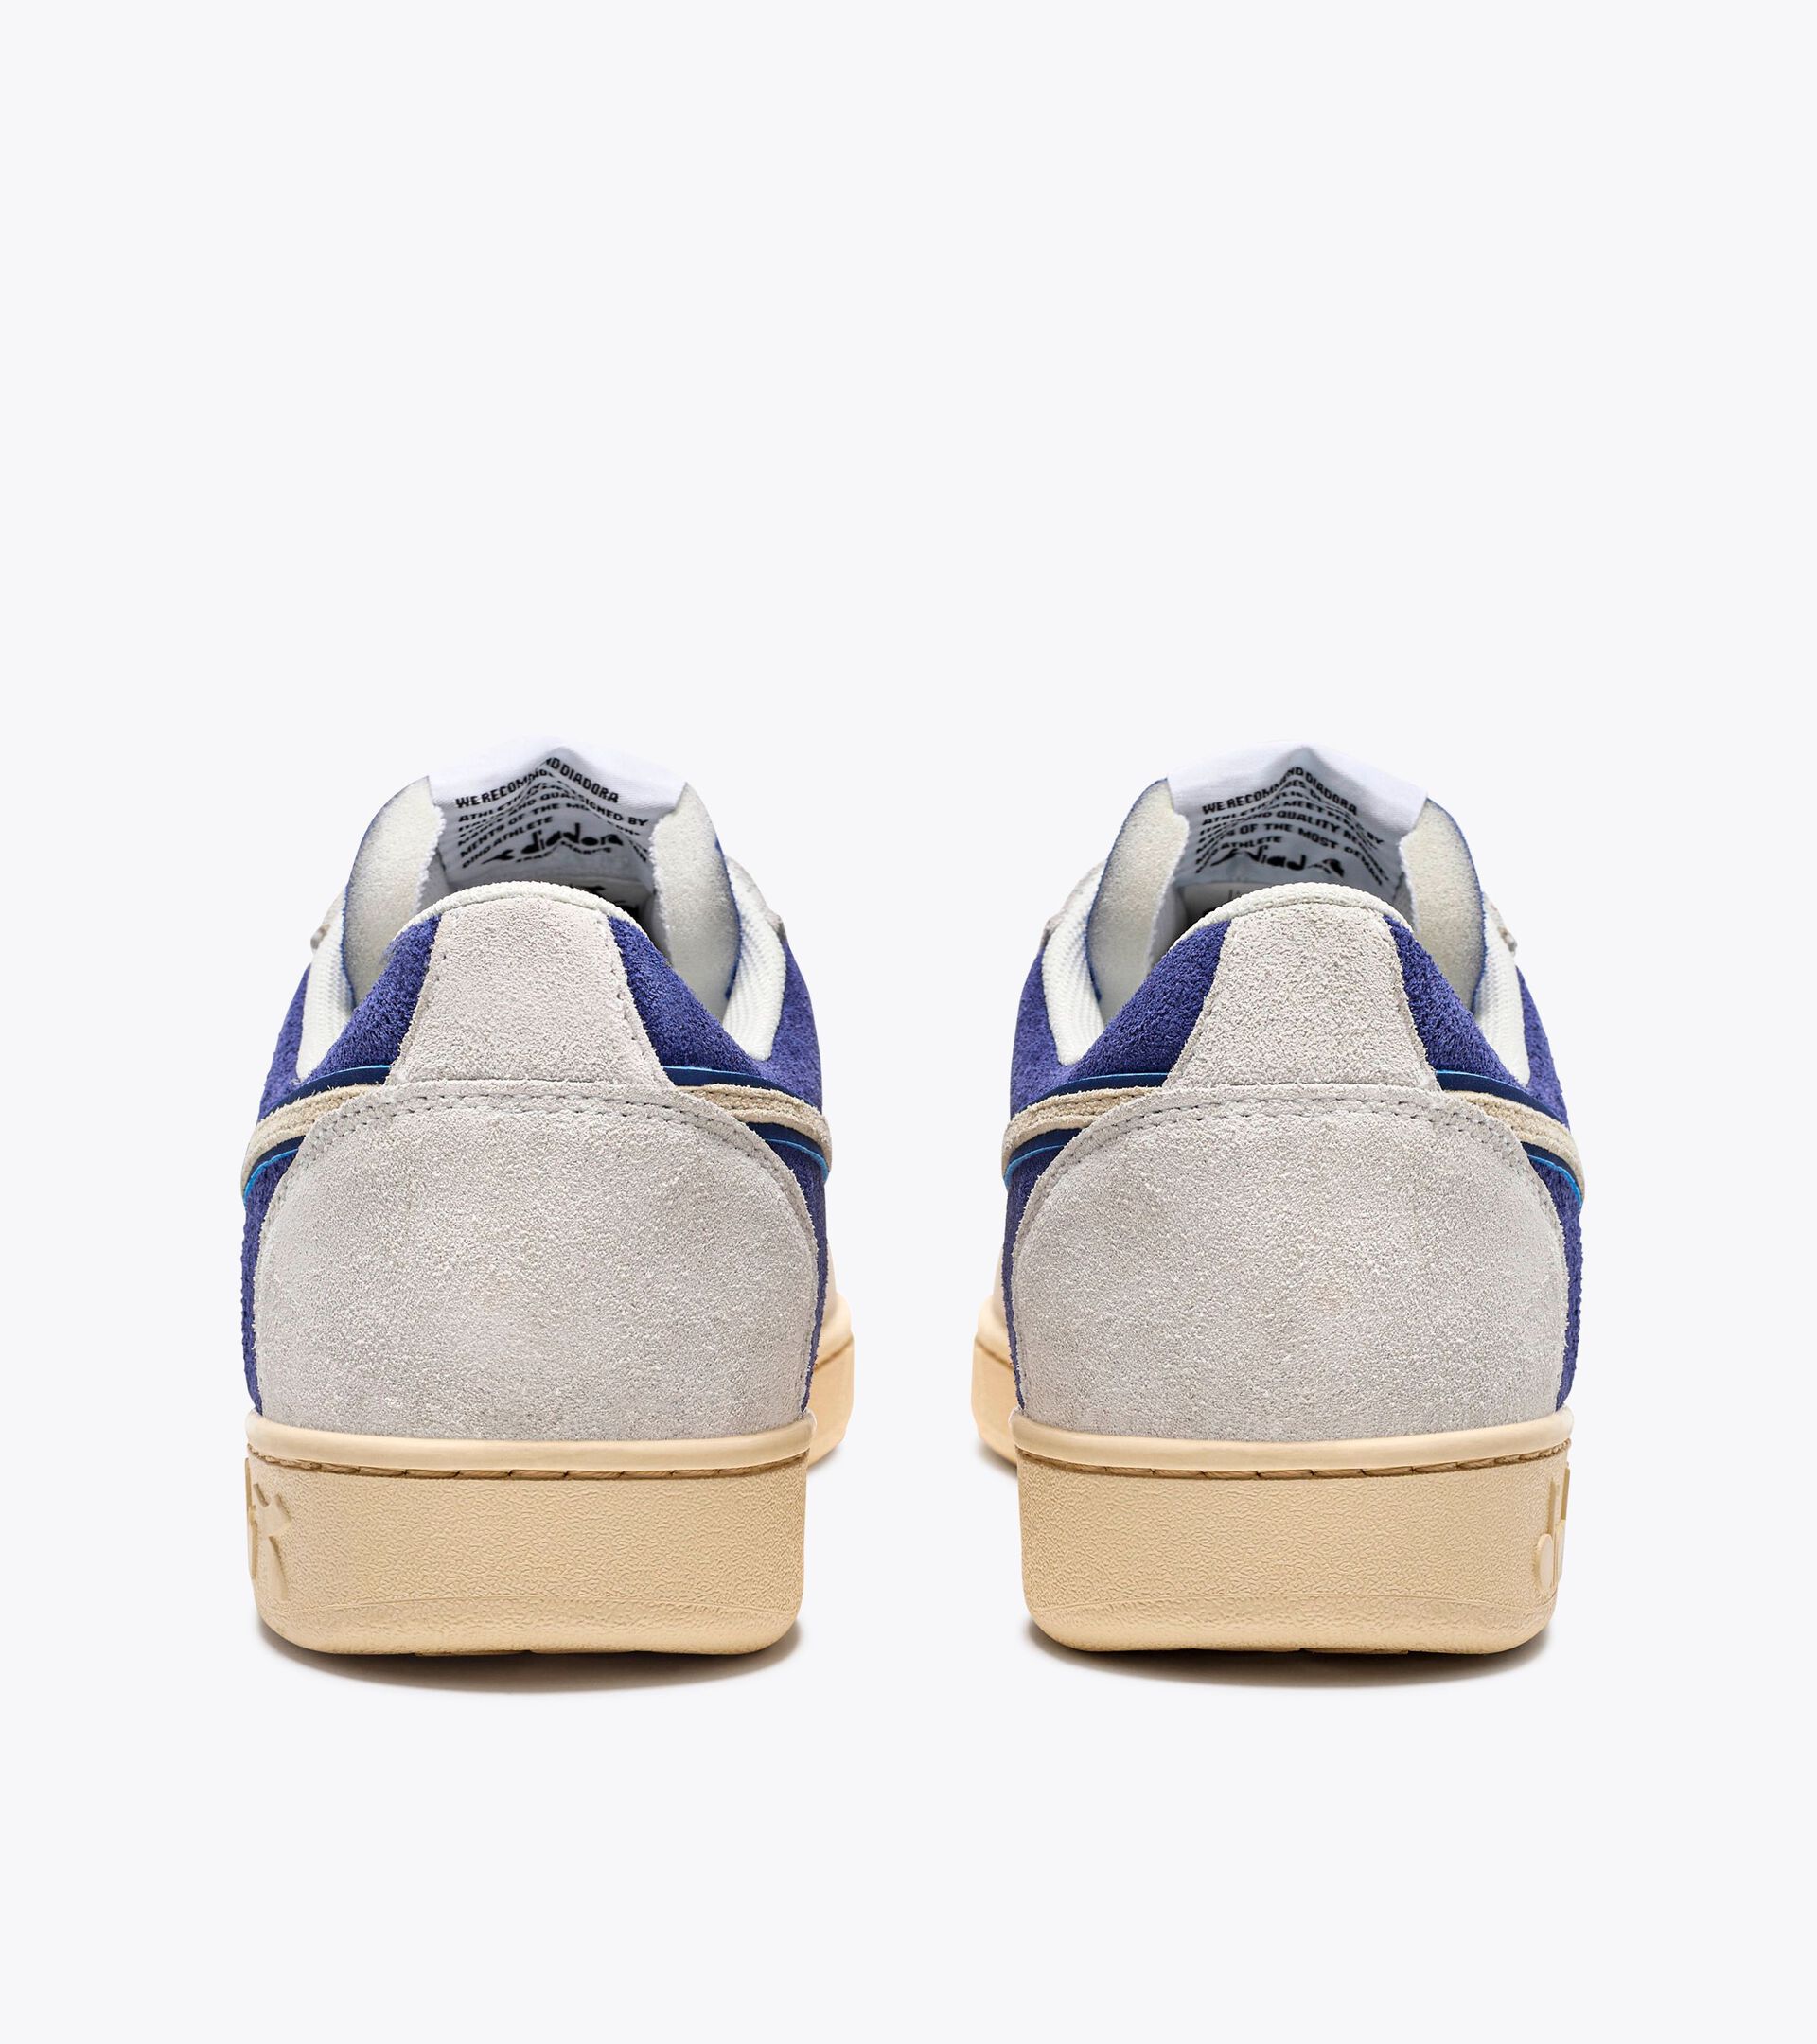 Sporty sneakers - Gender neutral MAGIC BASKET LOW SUEDE LEATHER WHITE/BLUE EYES - Diadora